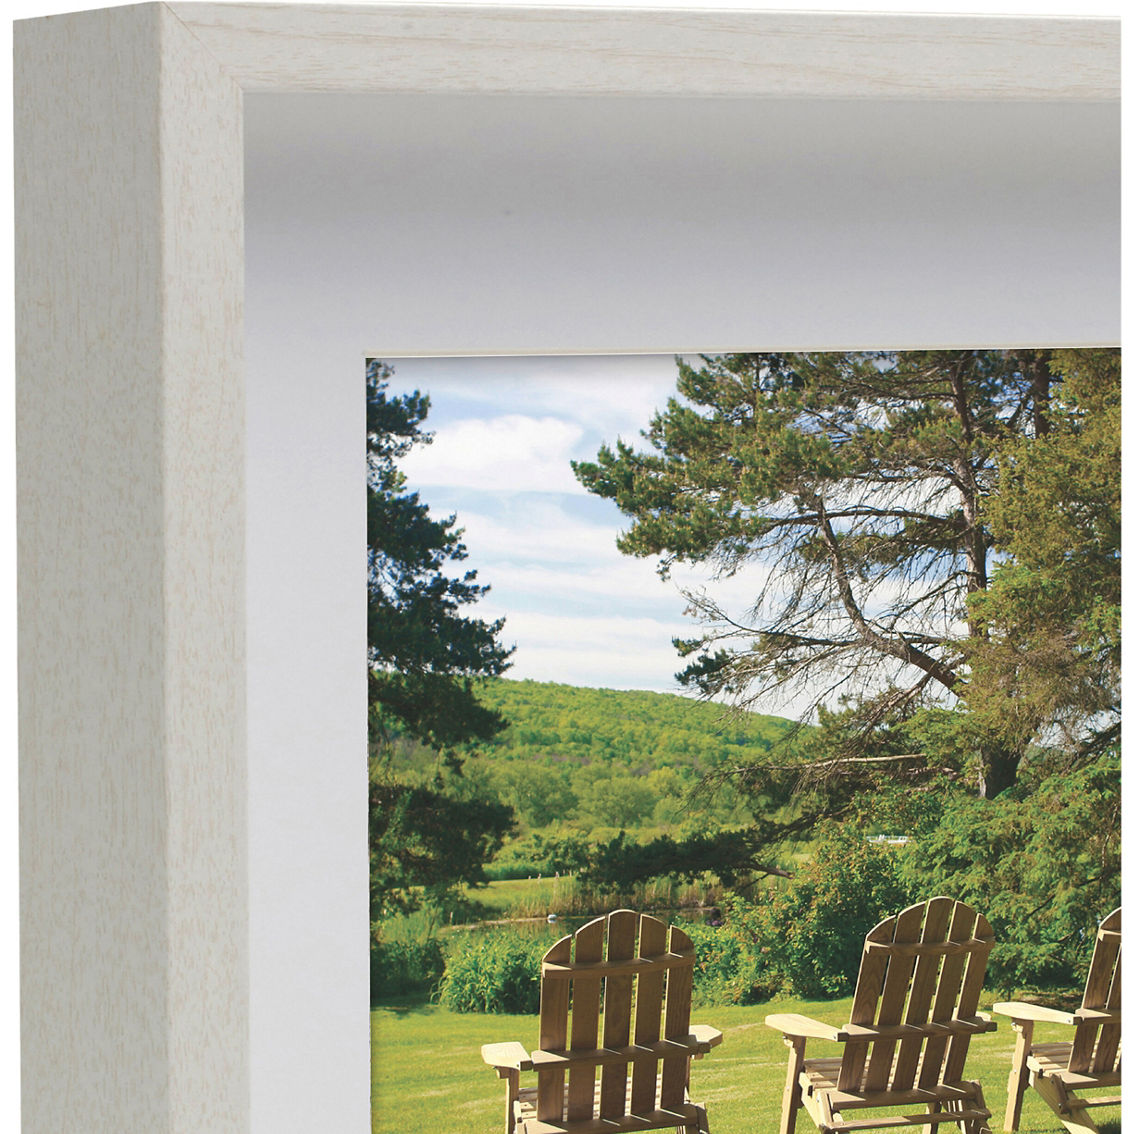 Mikasa Home Wood Gallery Portrait Frame - Image 4 of 6